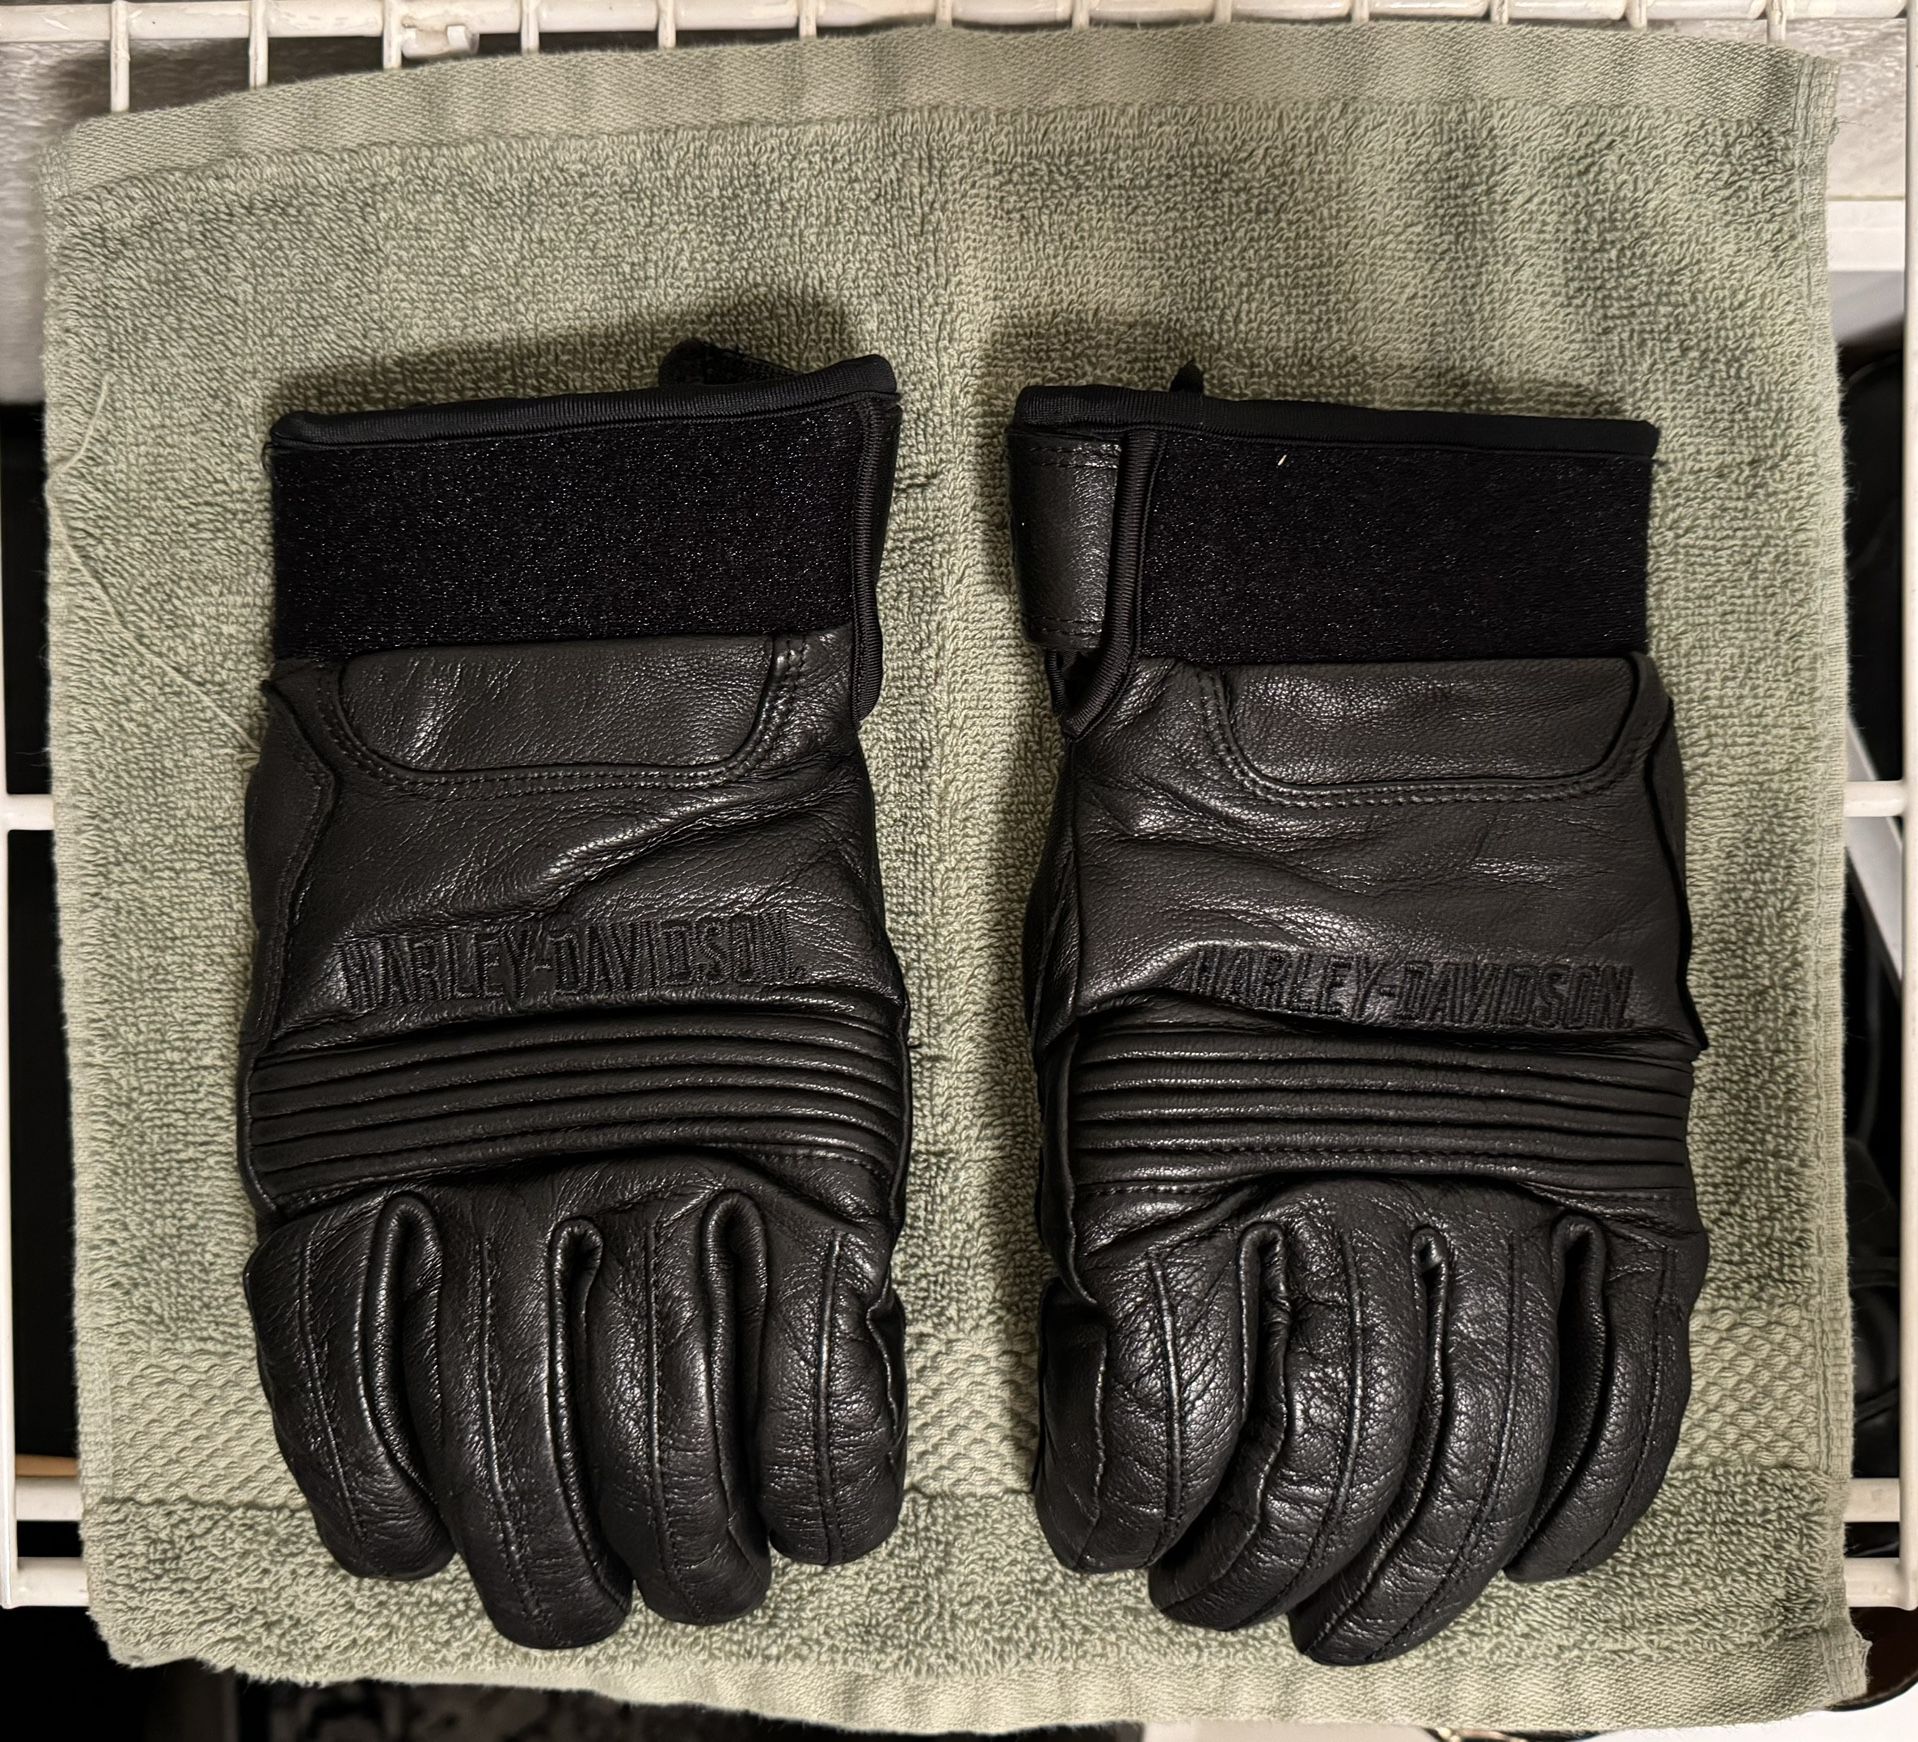 Harley Davidson Insulated Leather Gloves 